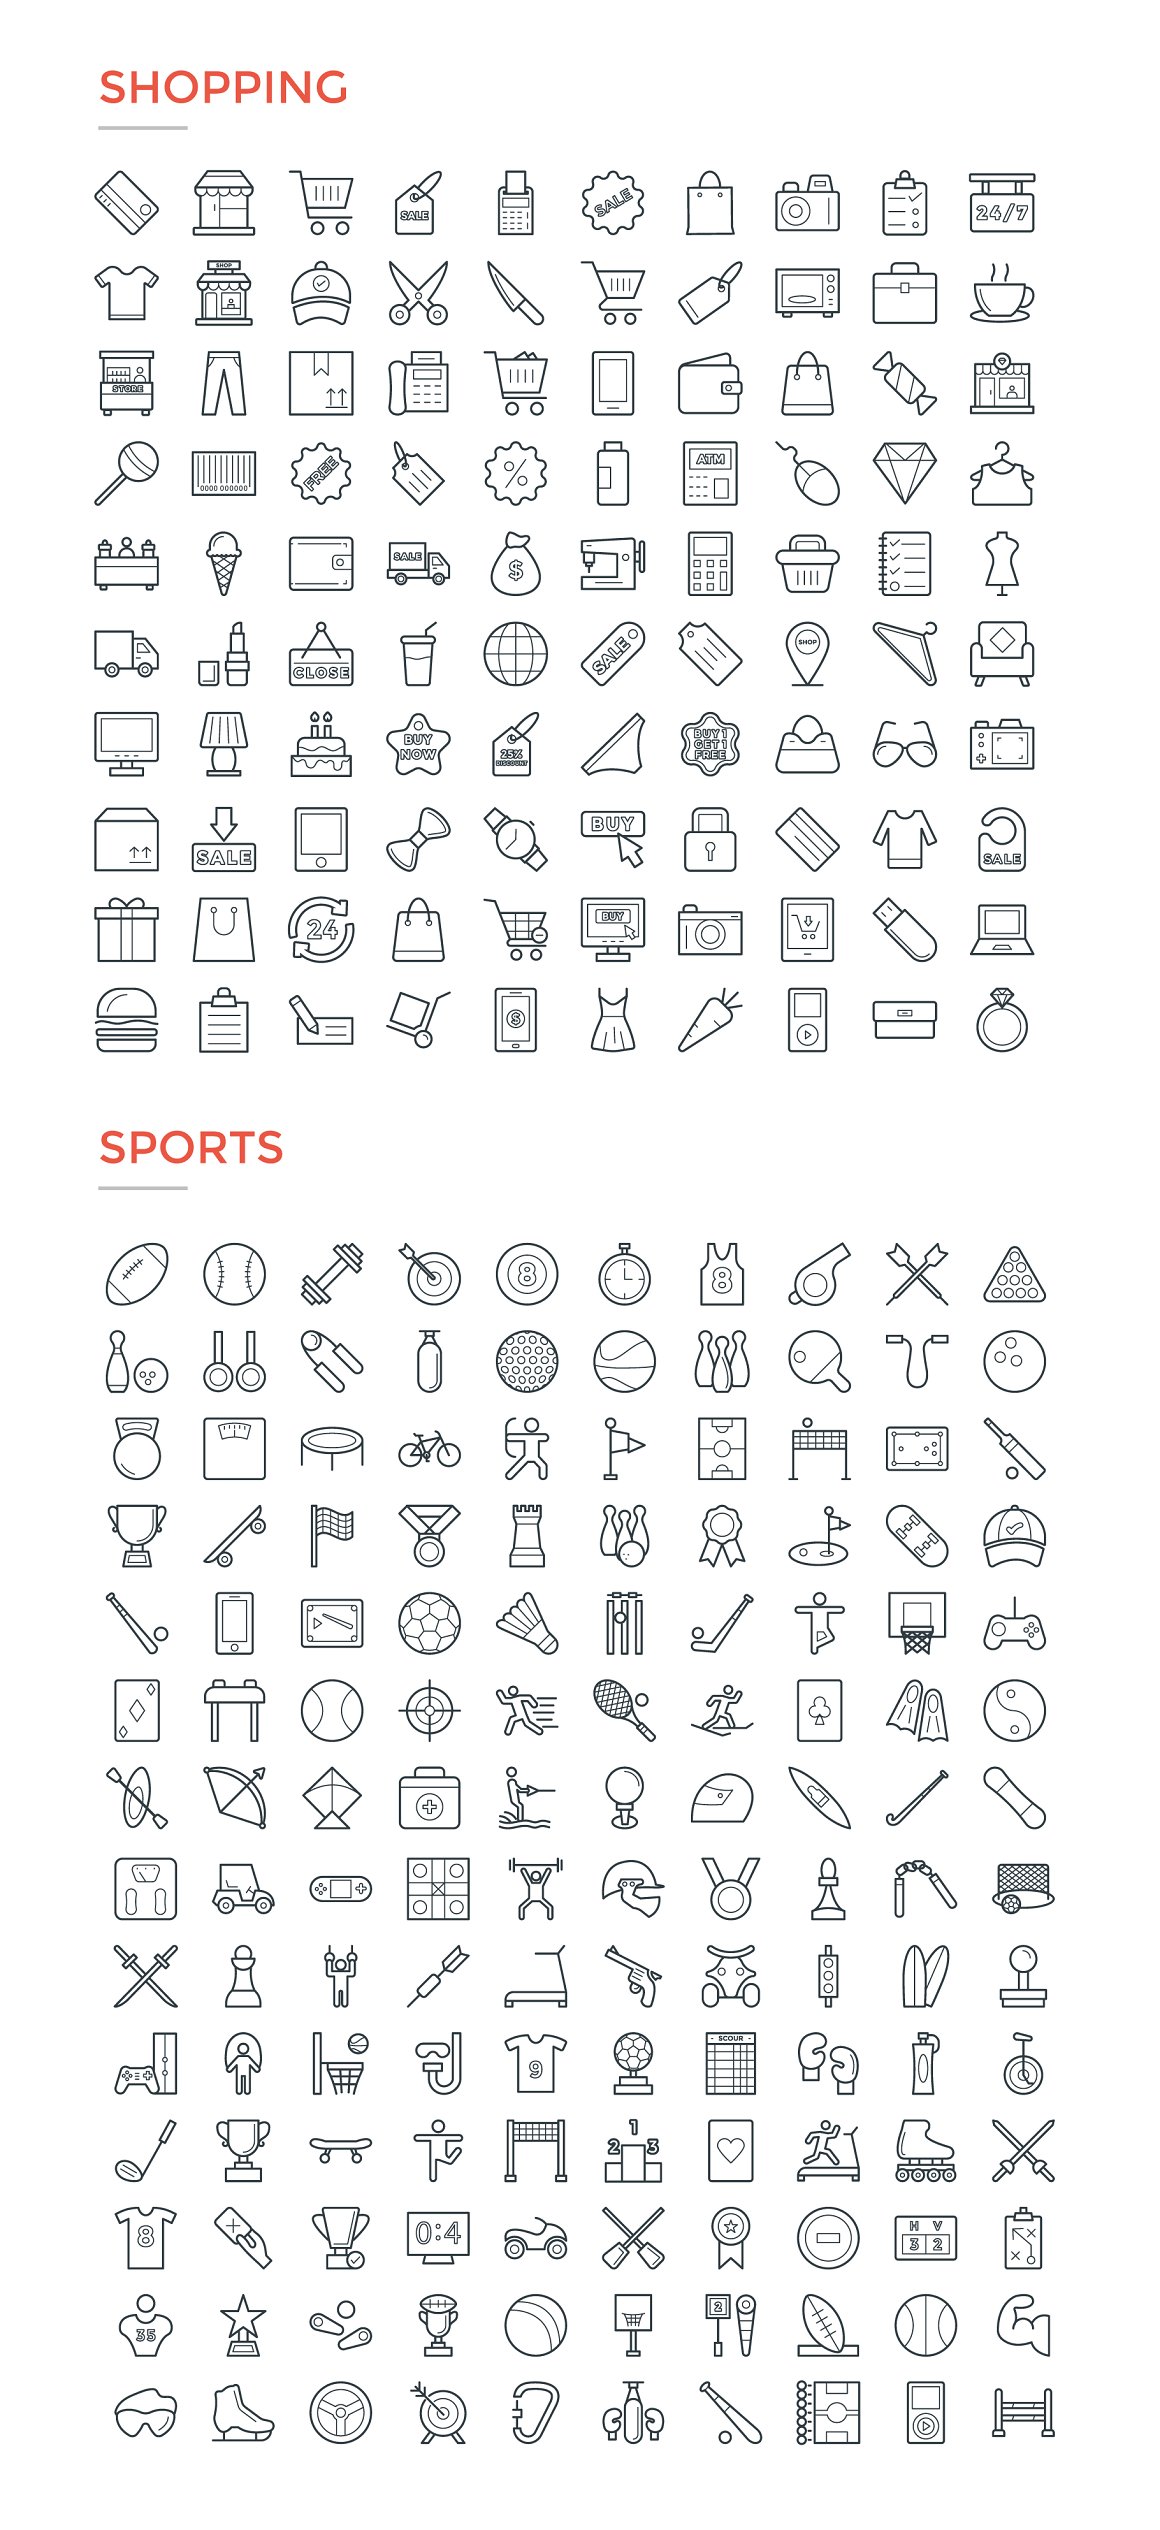 Pack of different black shopping and sports icons on a white background.